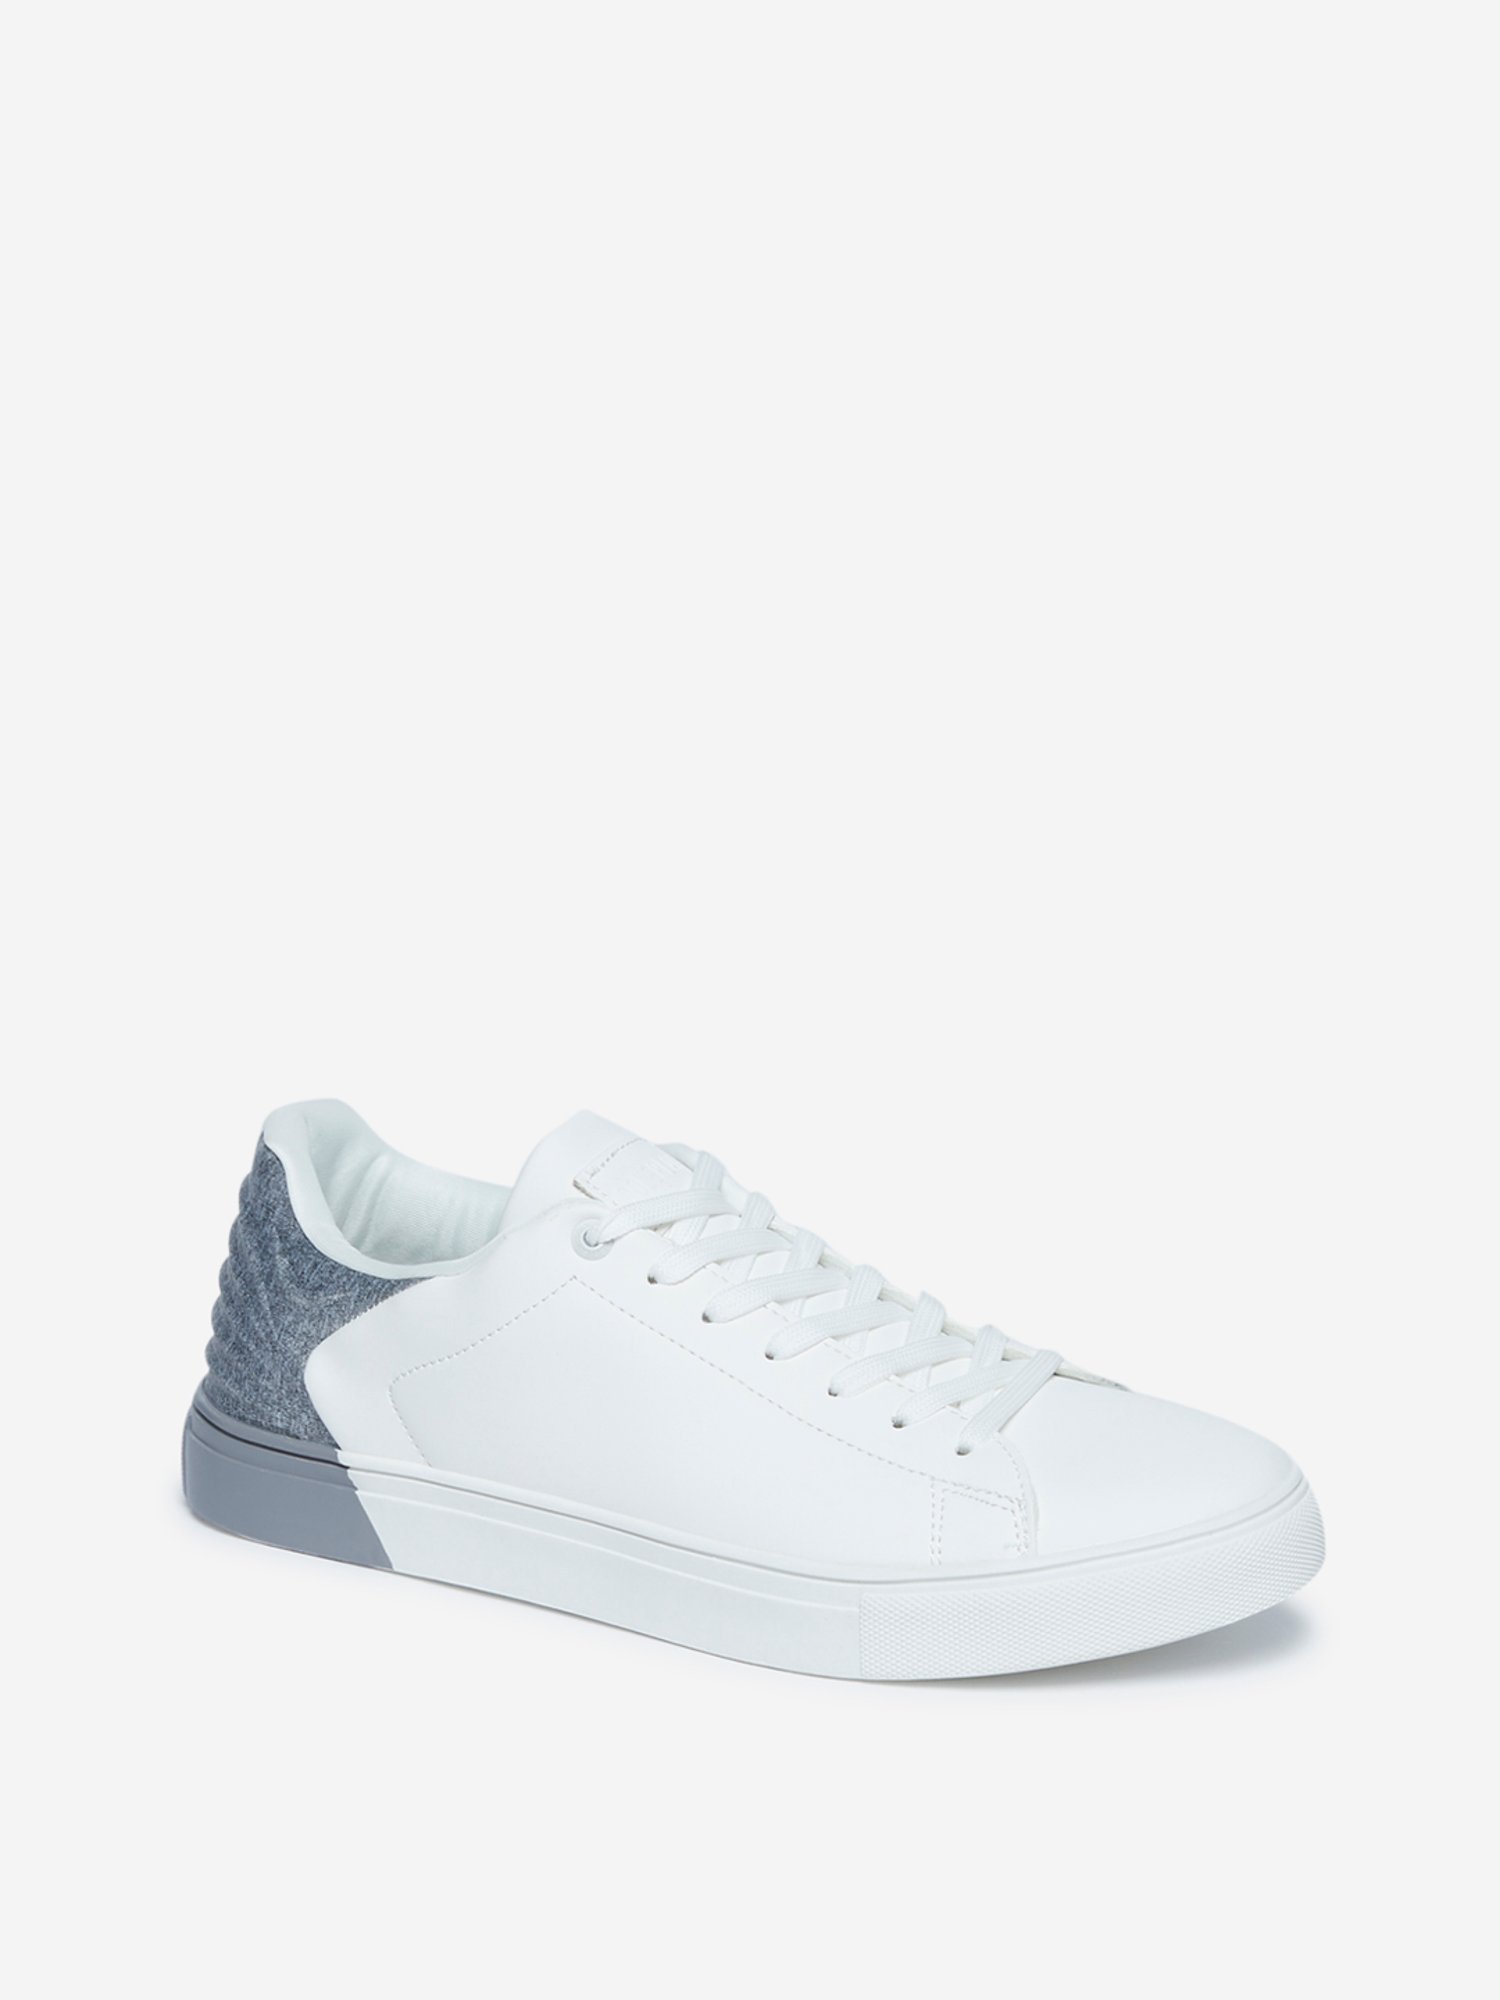 Buy SOLEPLAY by Westside Off-White Lace-up Sneakers for Online @ Tata CLiQ